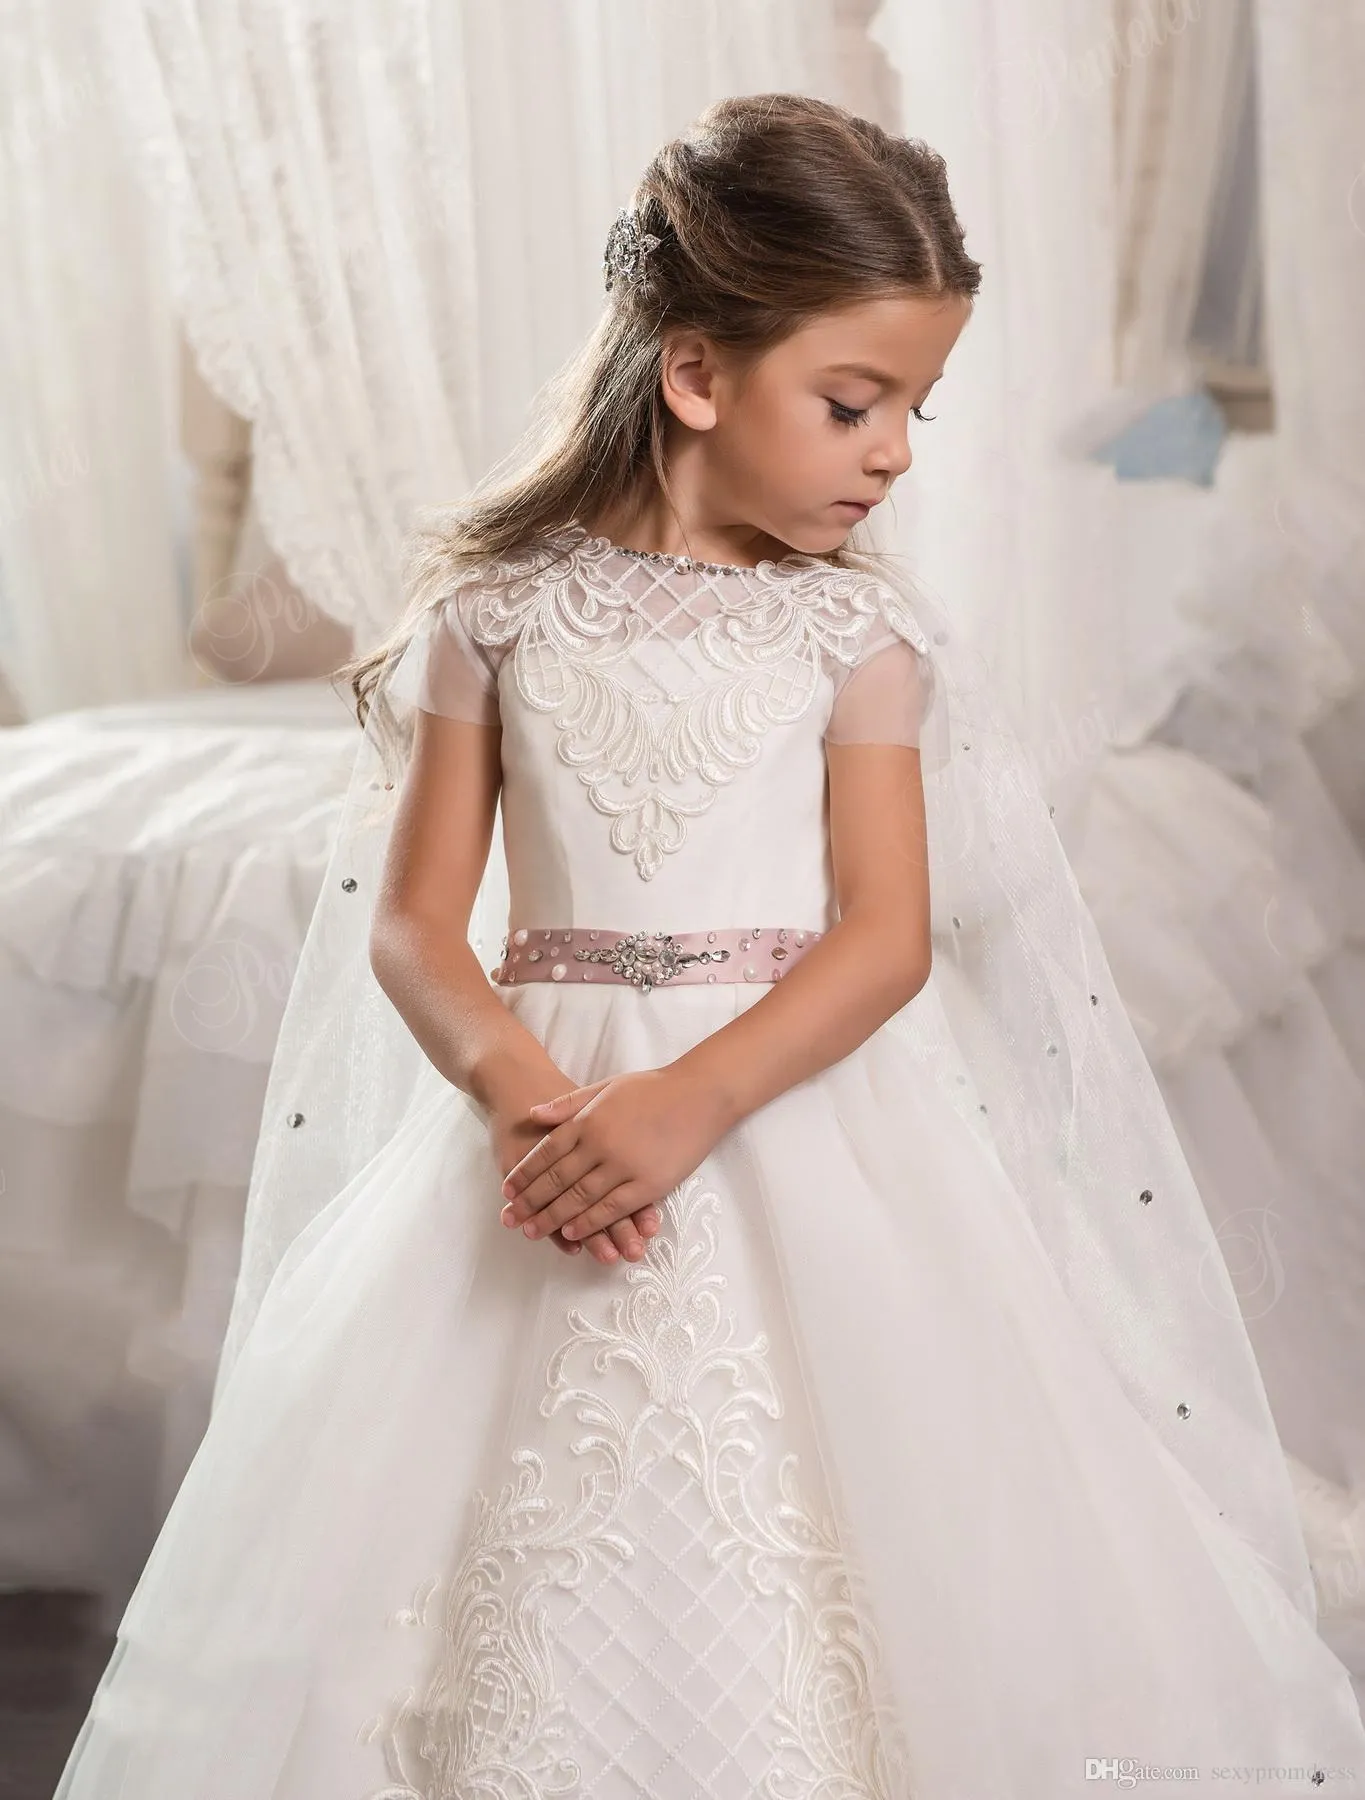 White Princess Tulle Cape Wedding Flower Girl Dresses With Beaded Ribbon Sash Floor Length Short Sleeve Girls Pageant Gowns Party Dresses